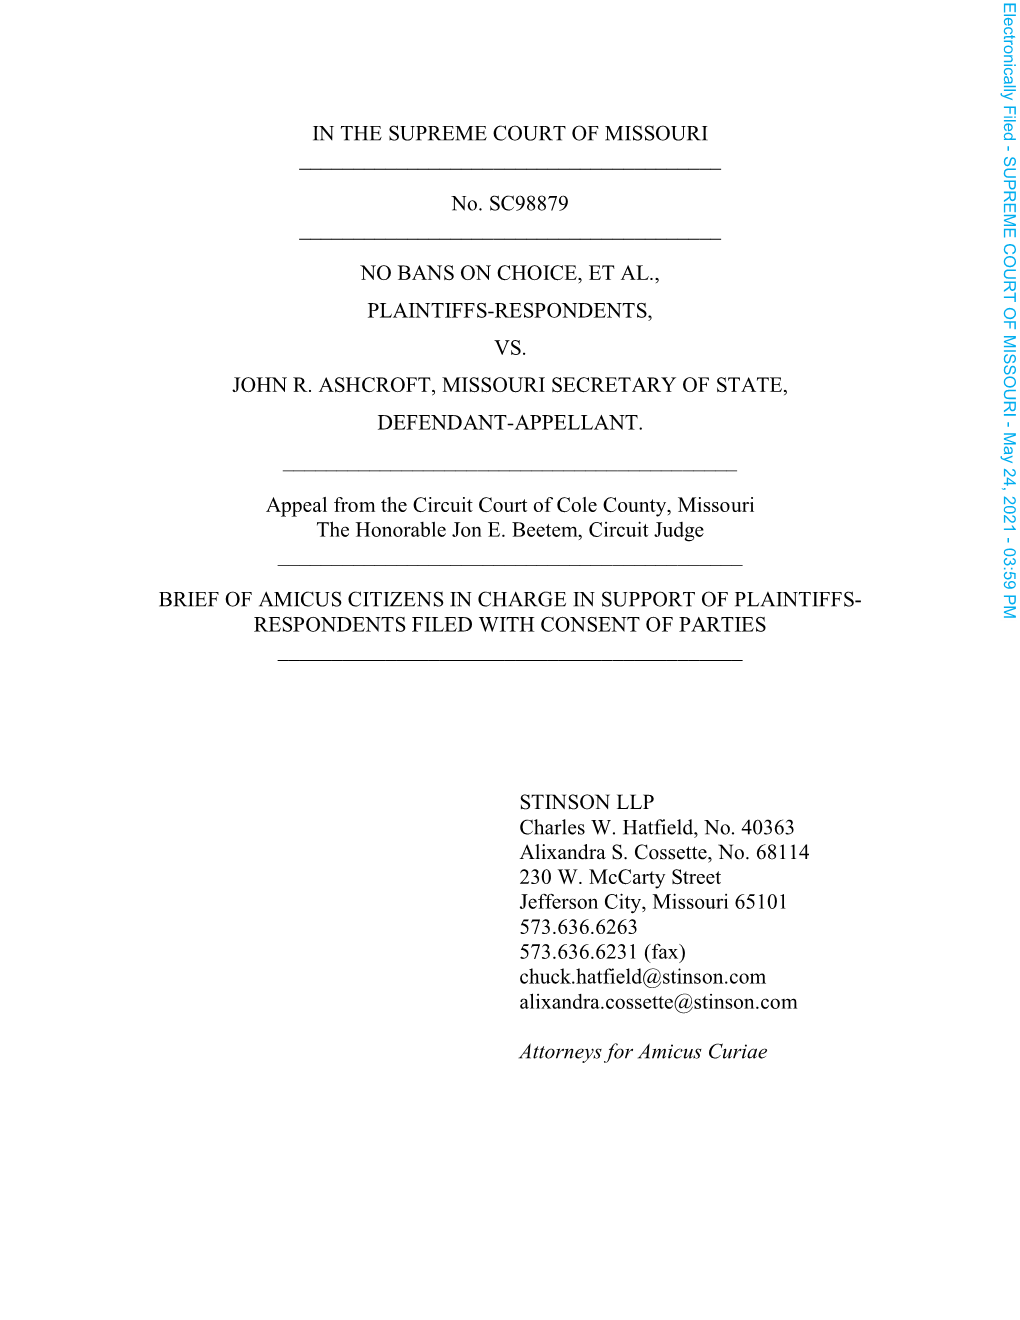 Amicus Brief of Citizens in Charge in SC98879